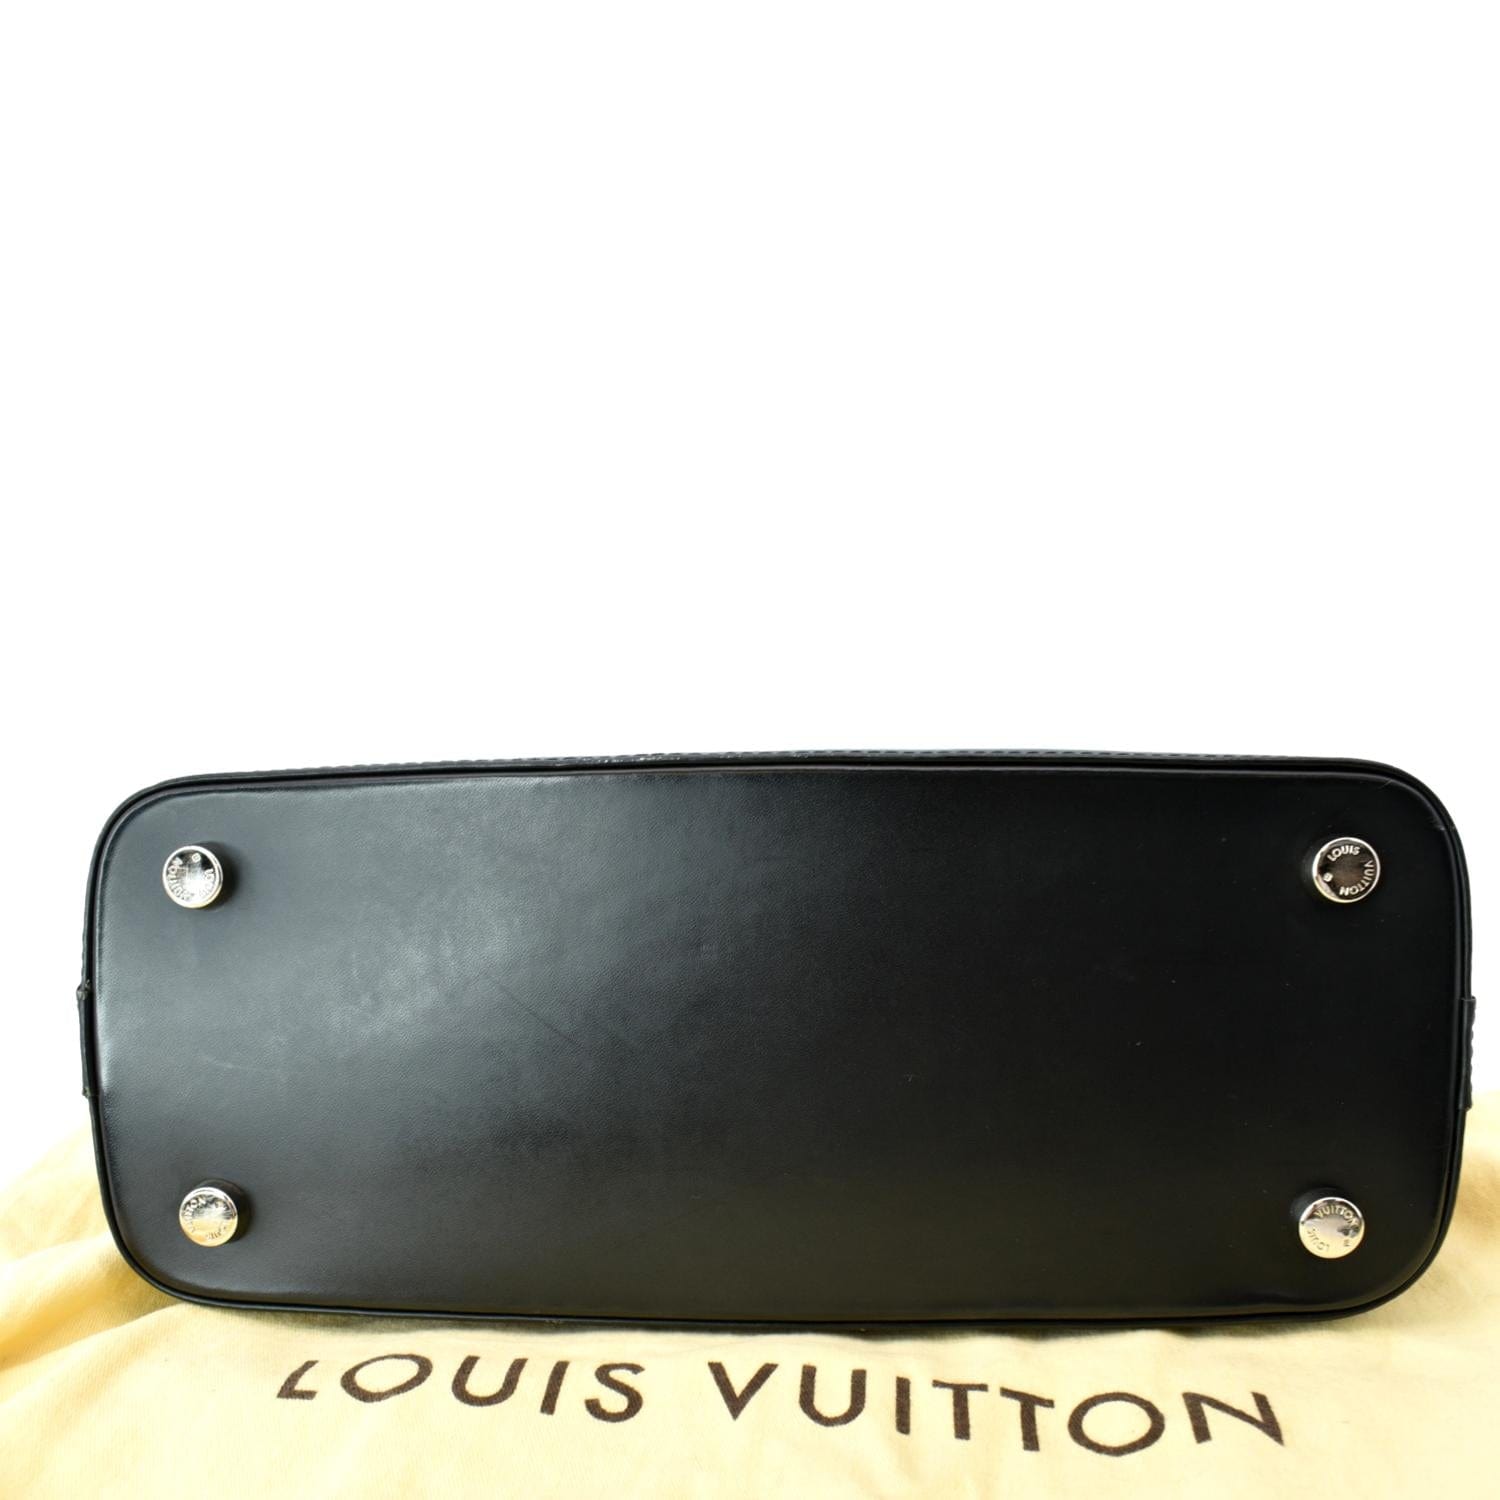 Louis Vuitton Mirabeau Pm - For Sale on 1stDibs